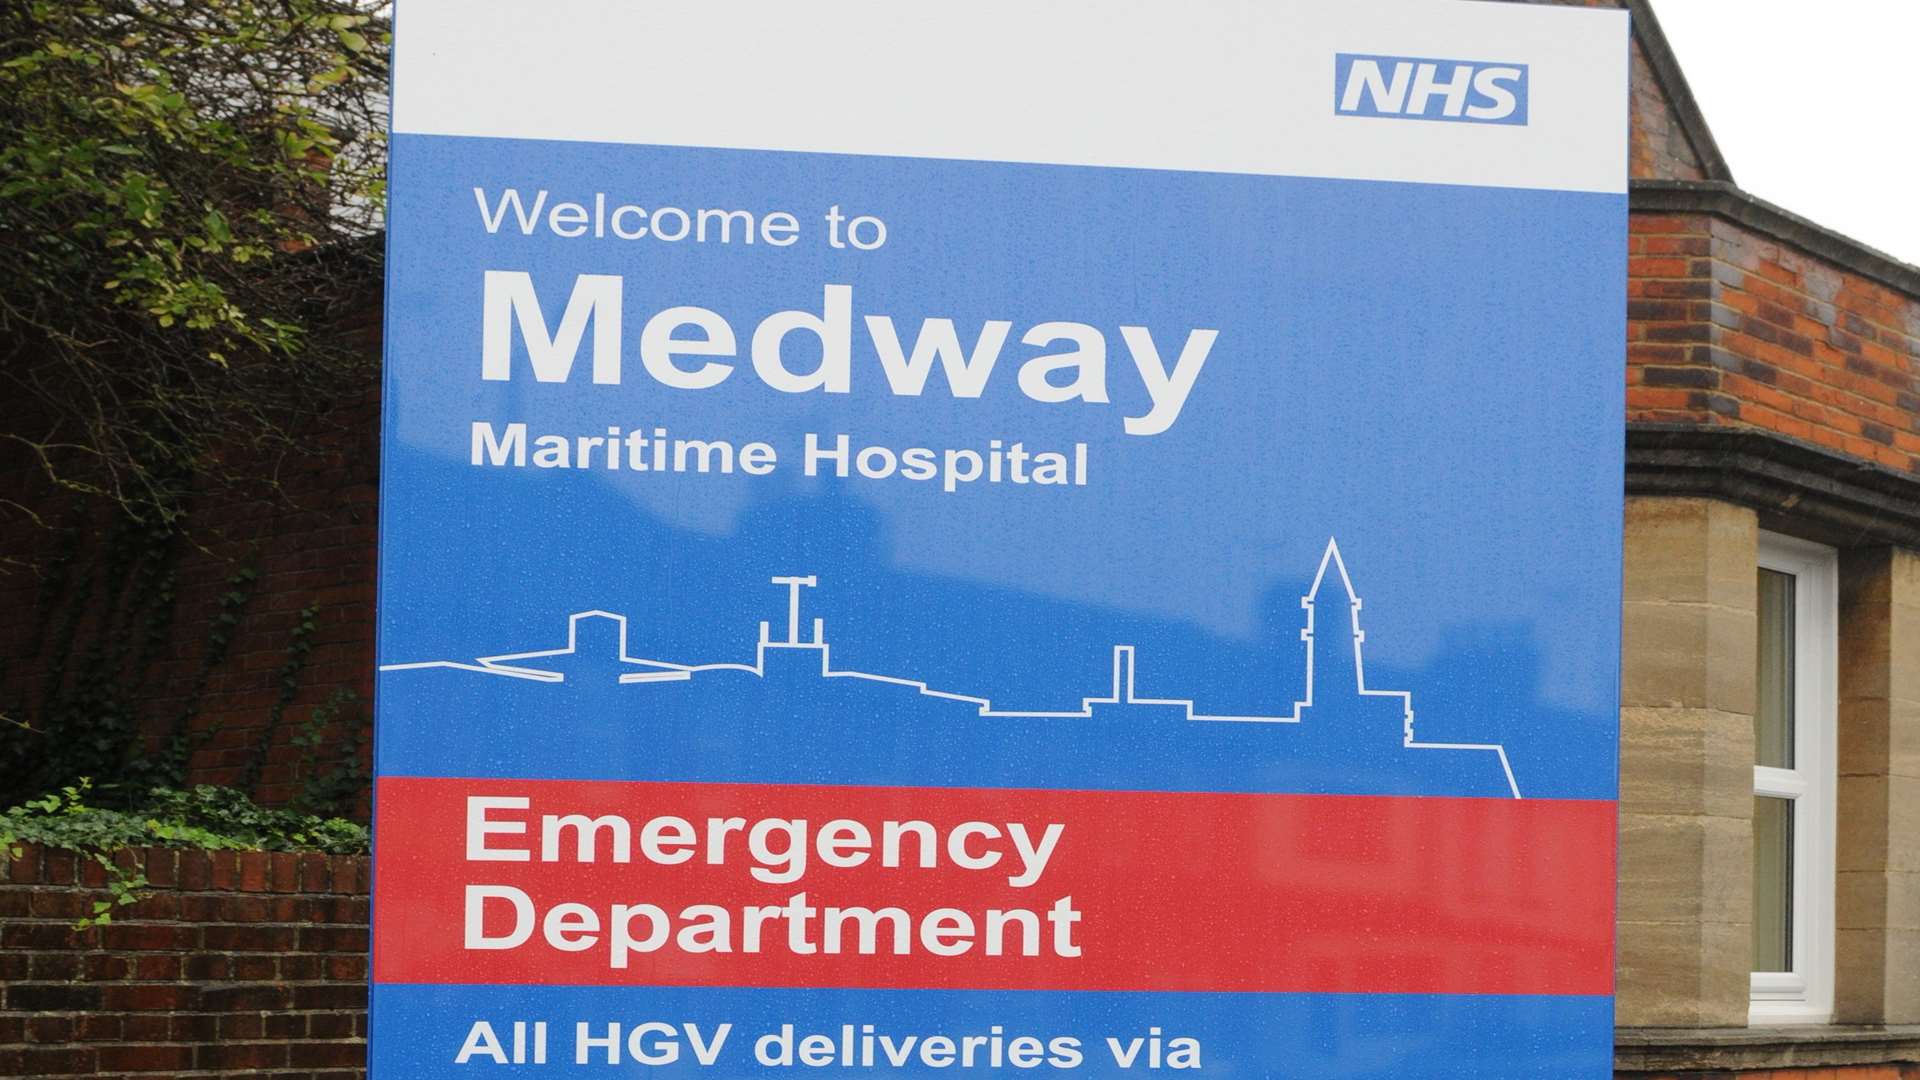 Medway Maritime Hospital has been given £1 million to help ease winter care pressures